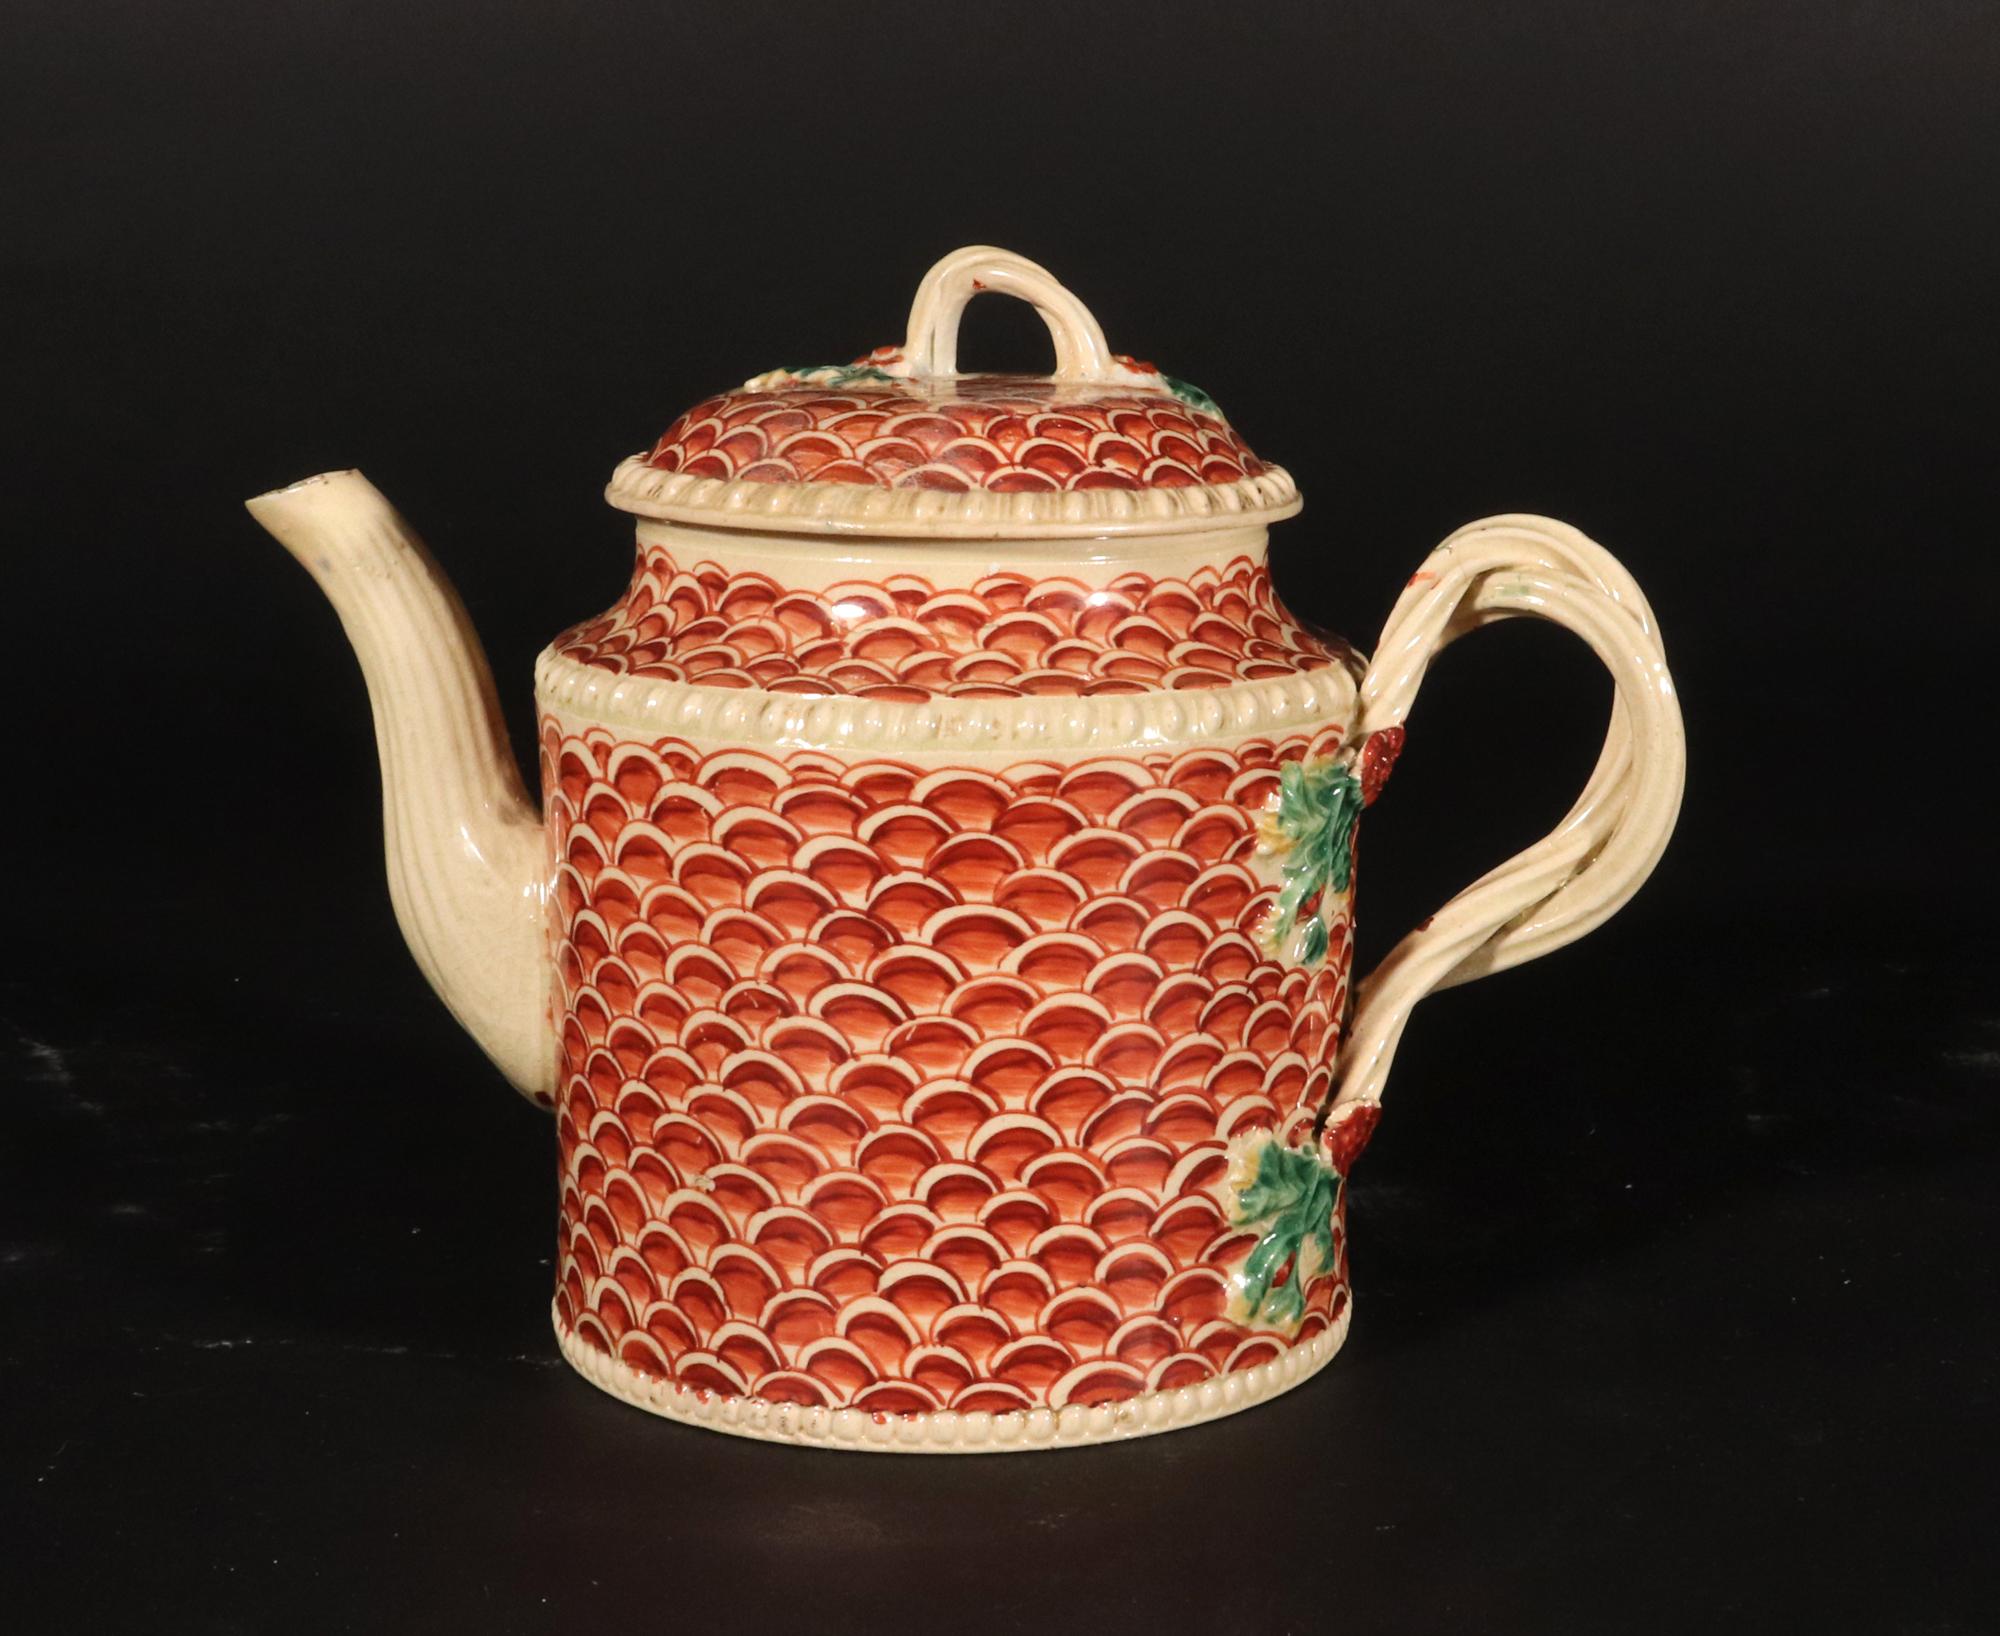  English Creamware Pottery Teapot and Cover with Rare Fish Scale Design

Origin: Probably Leeds, Yorkshire

Date: Circa 1770s

Description: This creamware teapot and cover exhibit a cylindrical form, featuring raised beading at the foot and shoulder